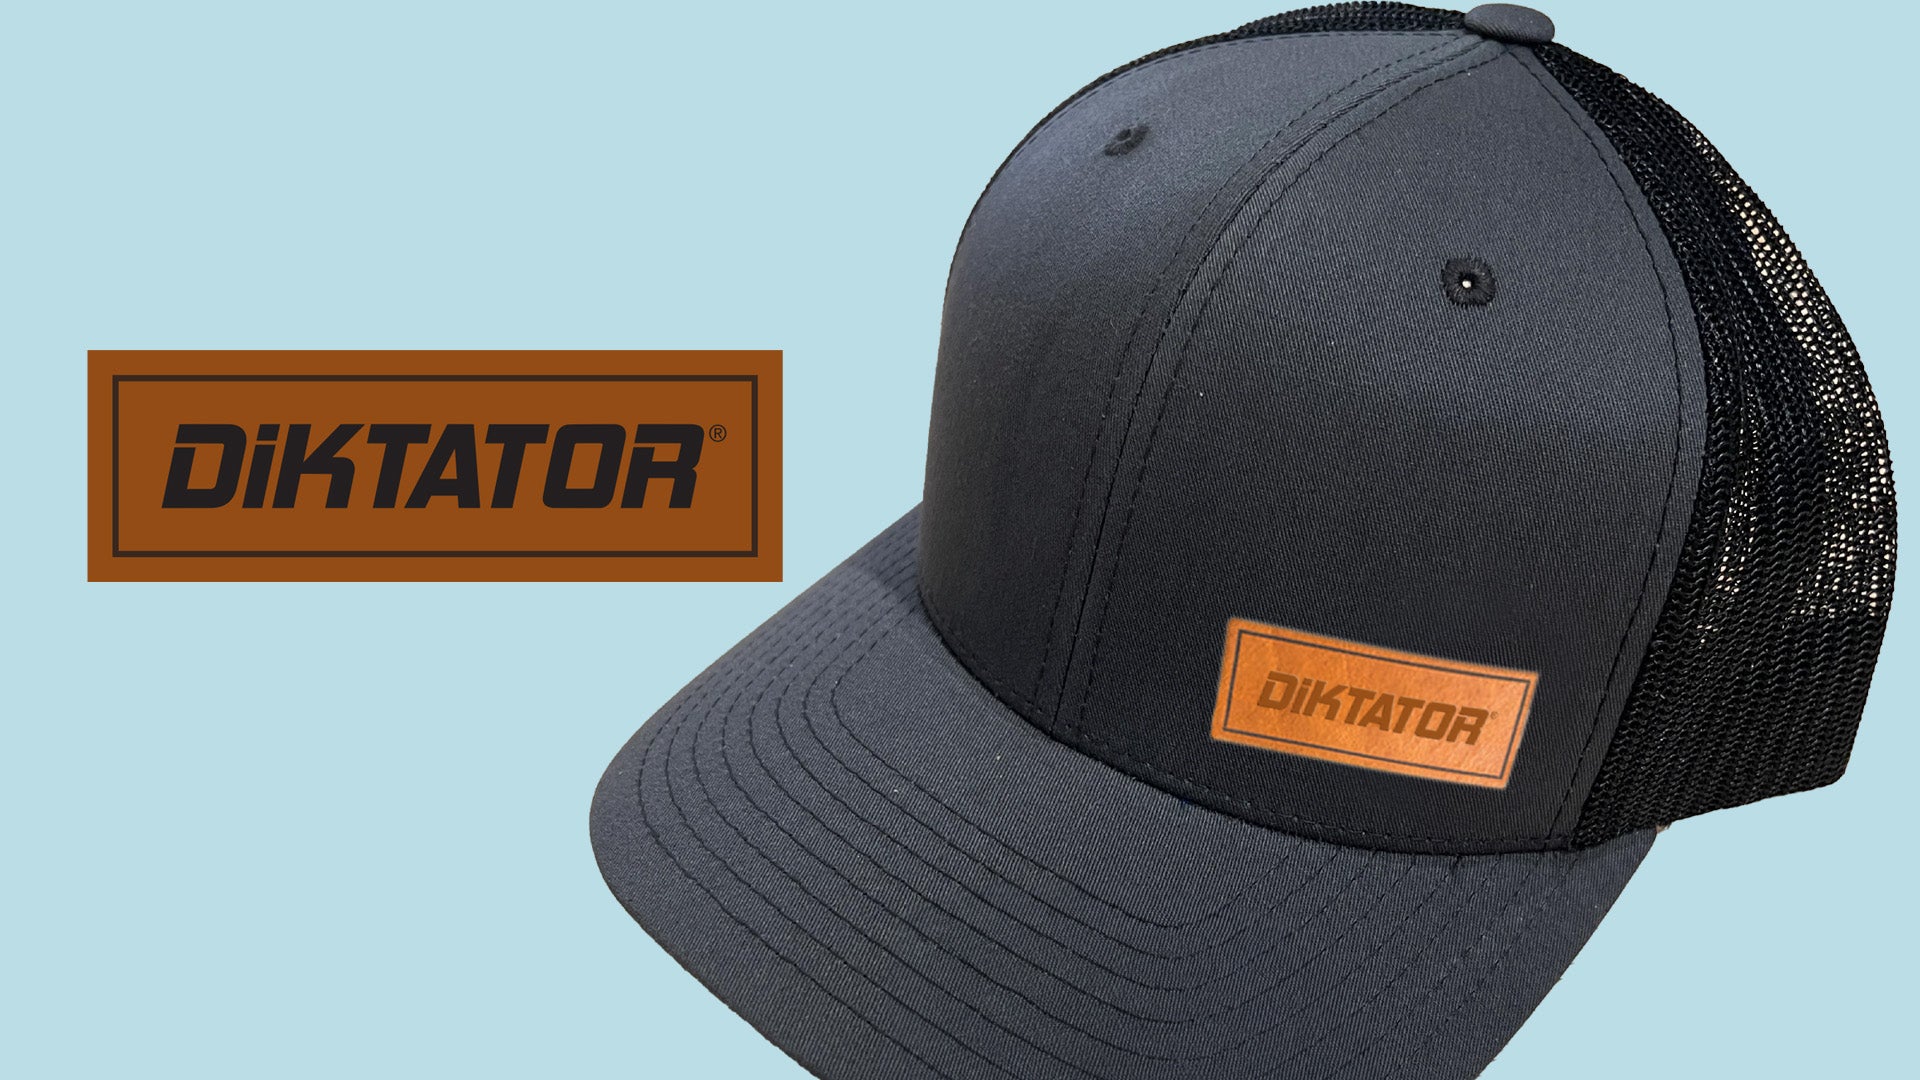 Celebrate Our New Website Launch with a Free Diktator Hat